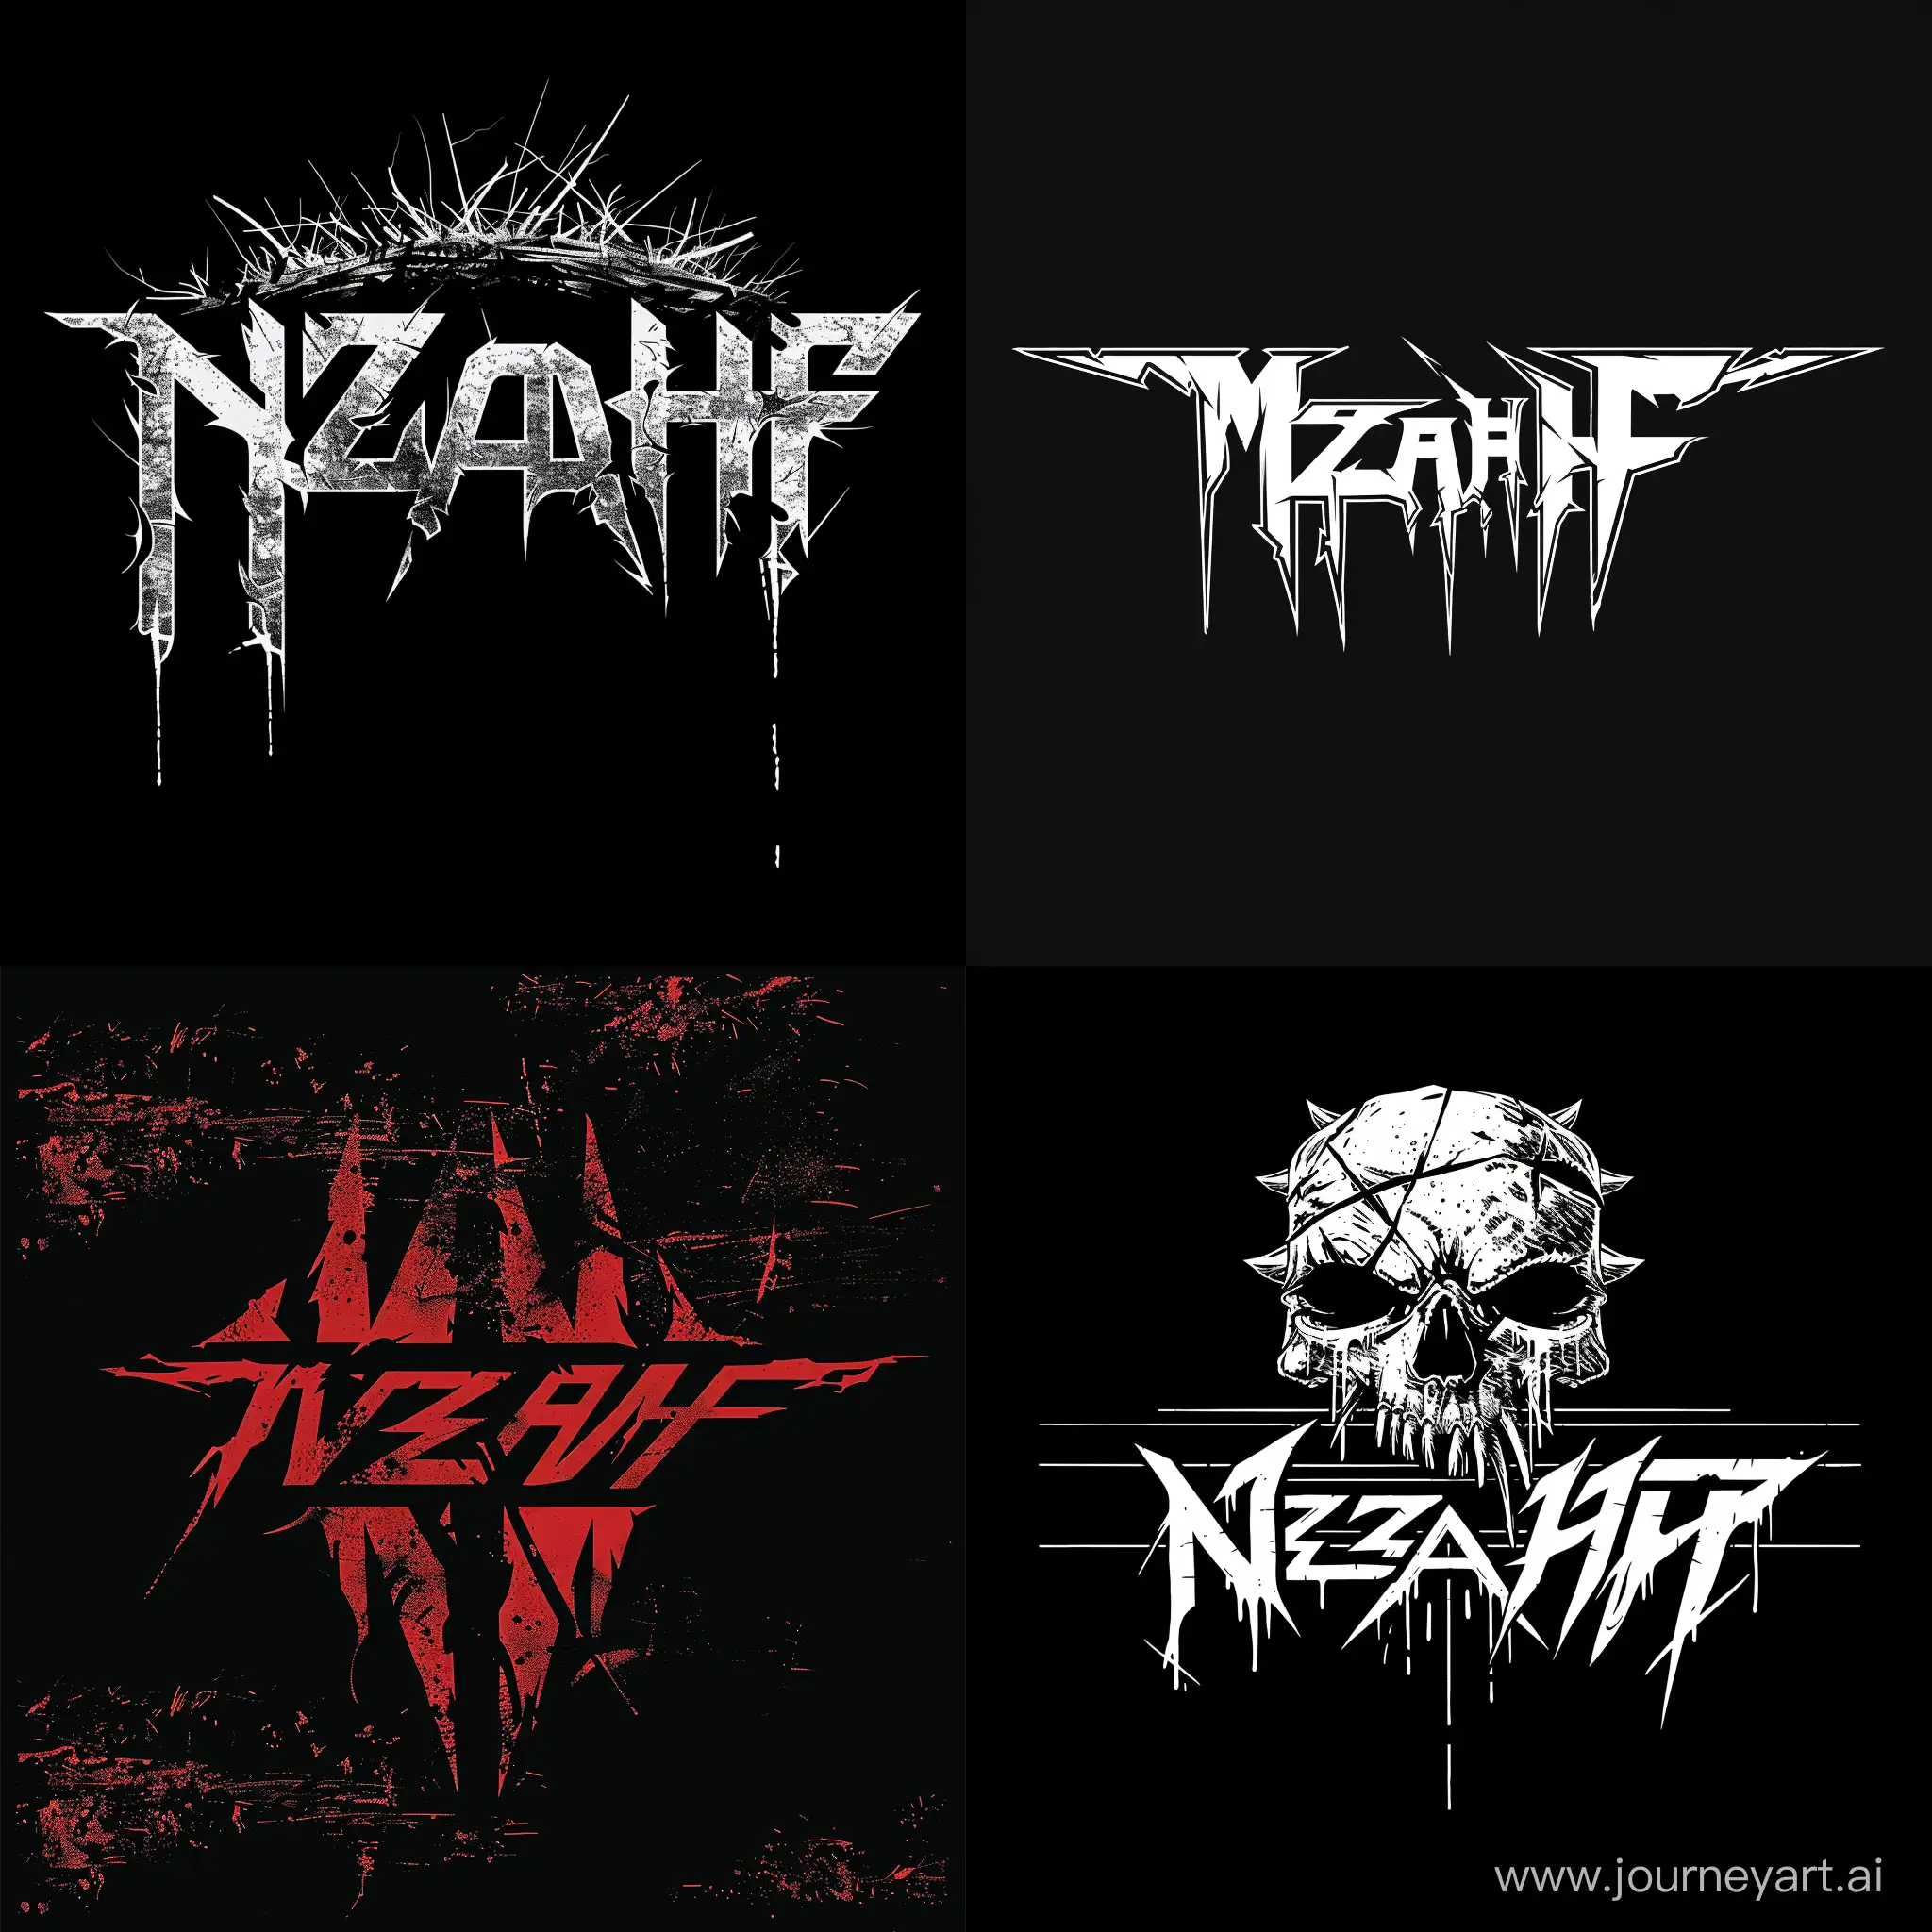 The text "NezaHF" as the metal band's logo, in vector format